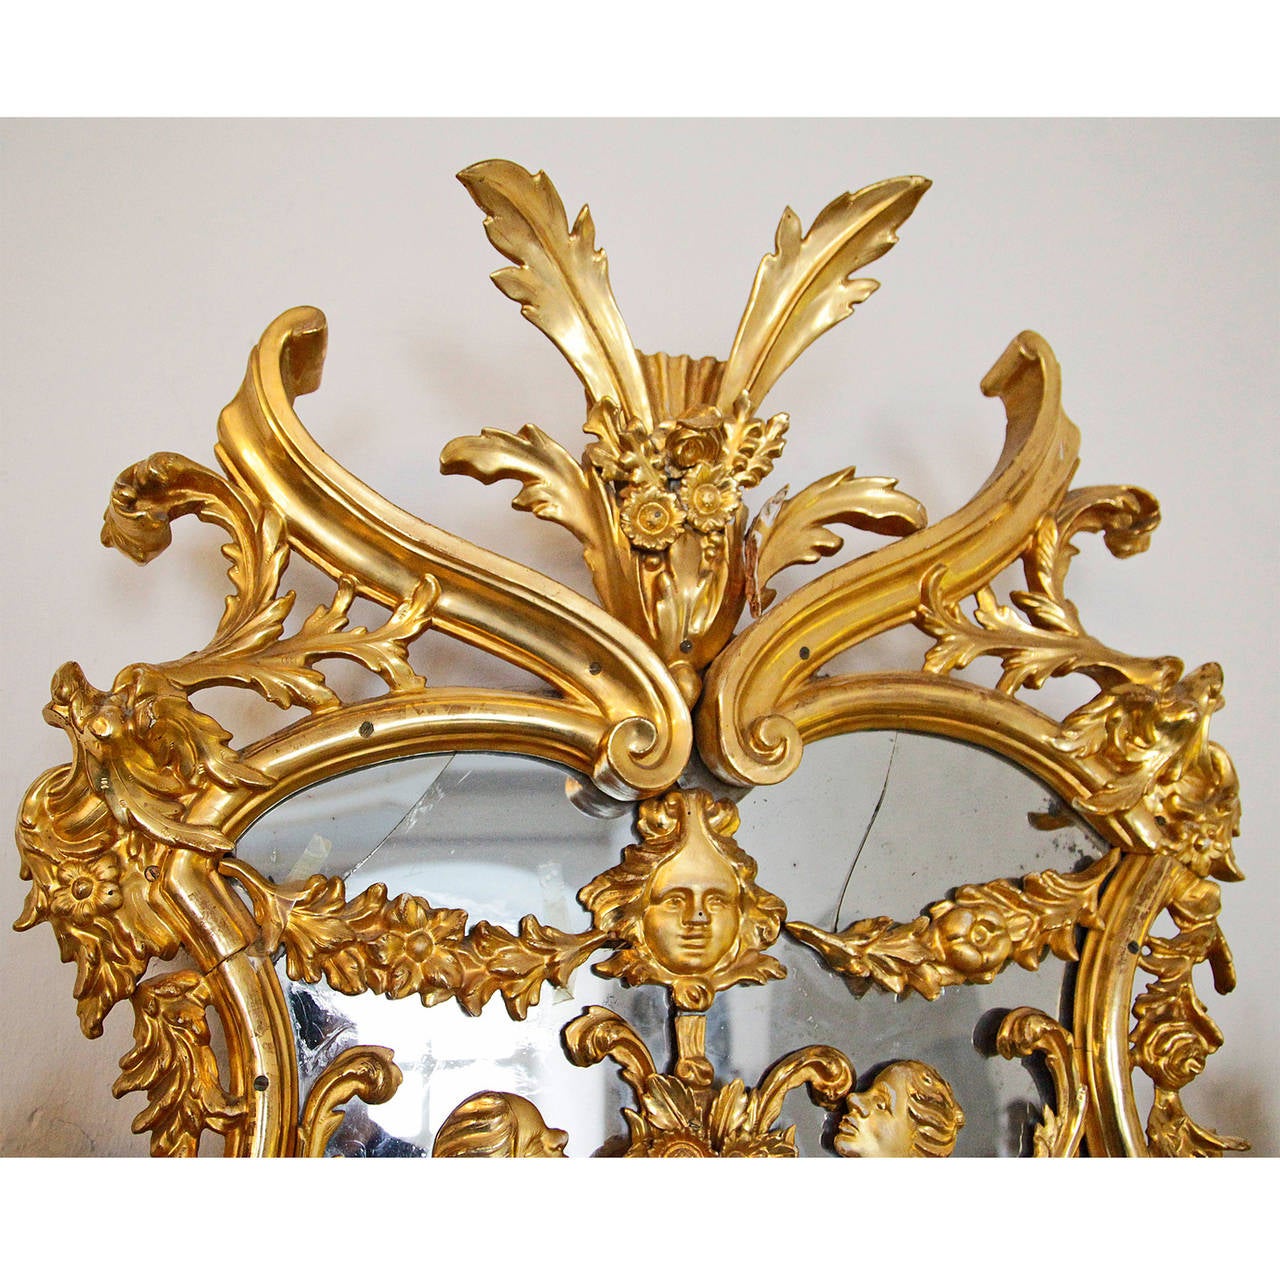 Magnificently Florence Palace Mirror, circa 1750 - 1770.
The gilding was restored in the 19th Century.
Provenance: From a German collection. Acquired in Florence about 40 years ago.